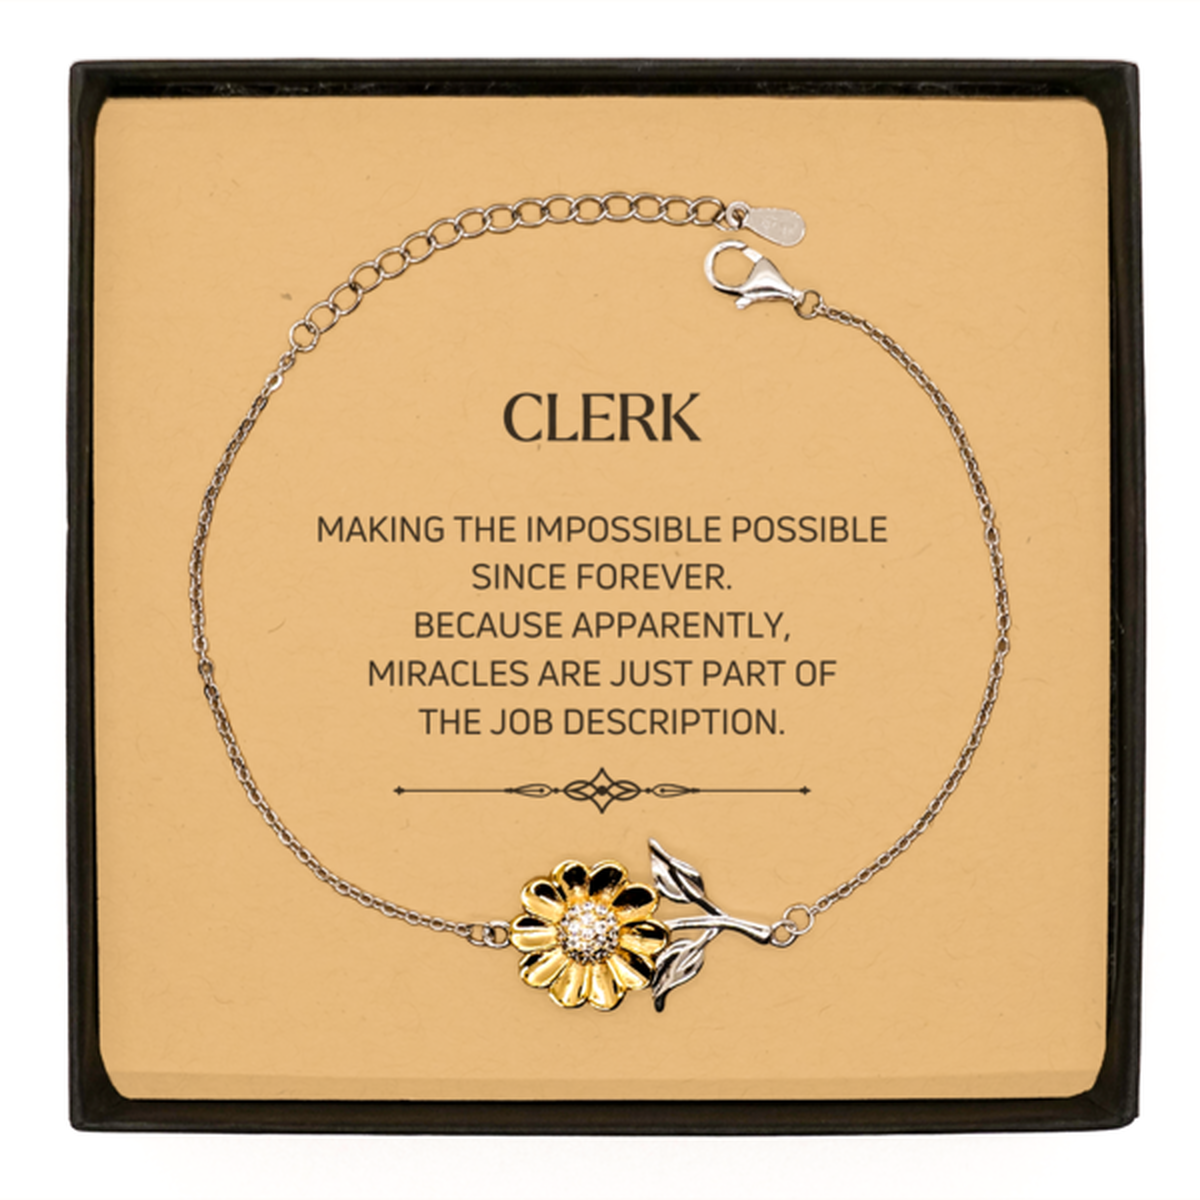 Funny Clerk Gifts, Miracles are just part of the job description, Inspirational Birthday Sunflower Bracelet For Clerk, Men, Women, Coworkers, Friends, Boss